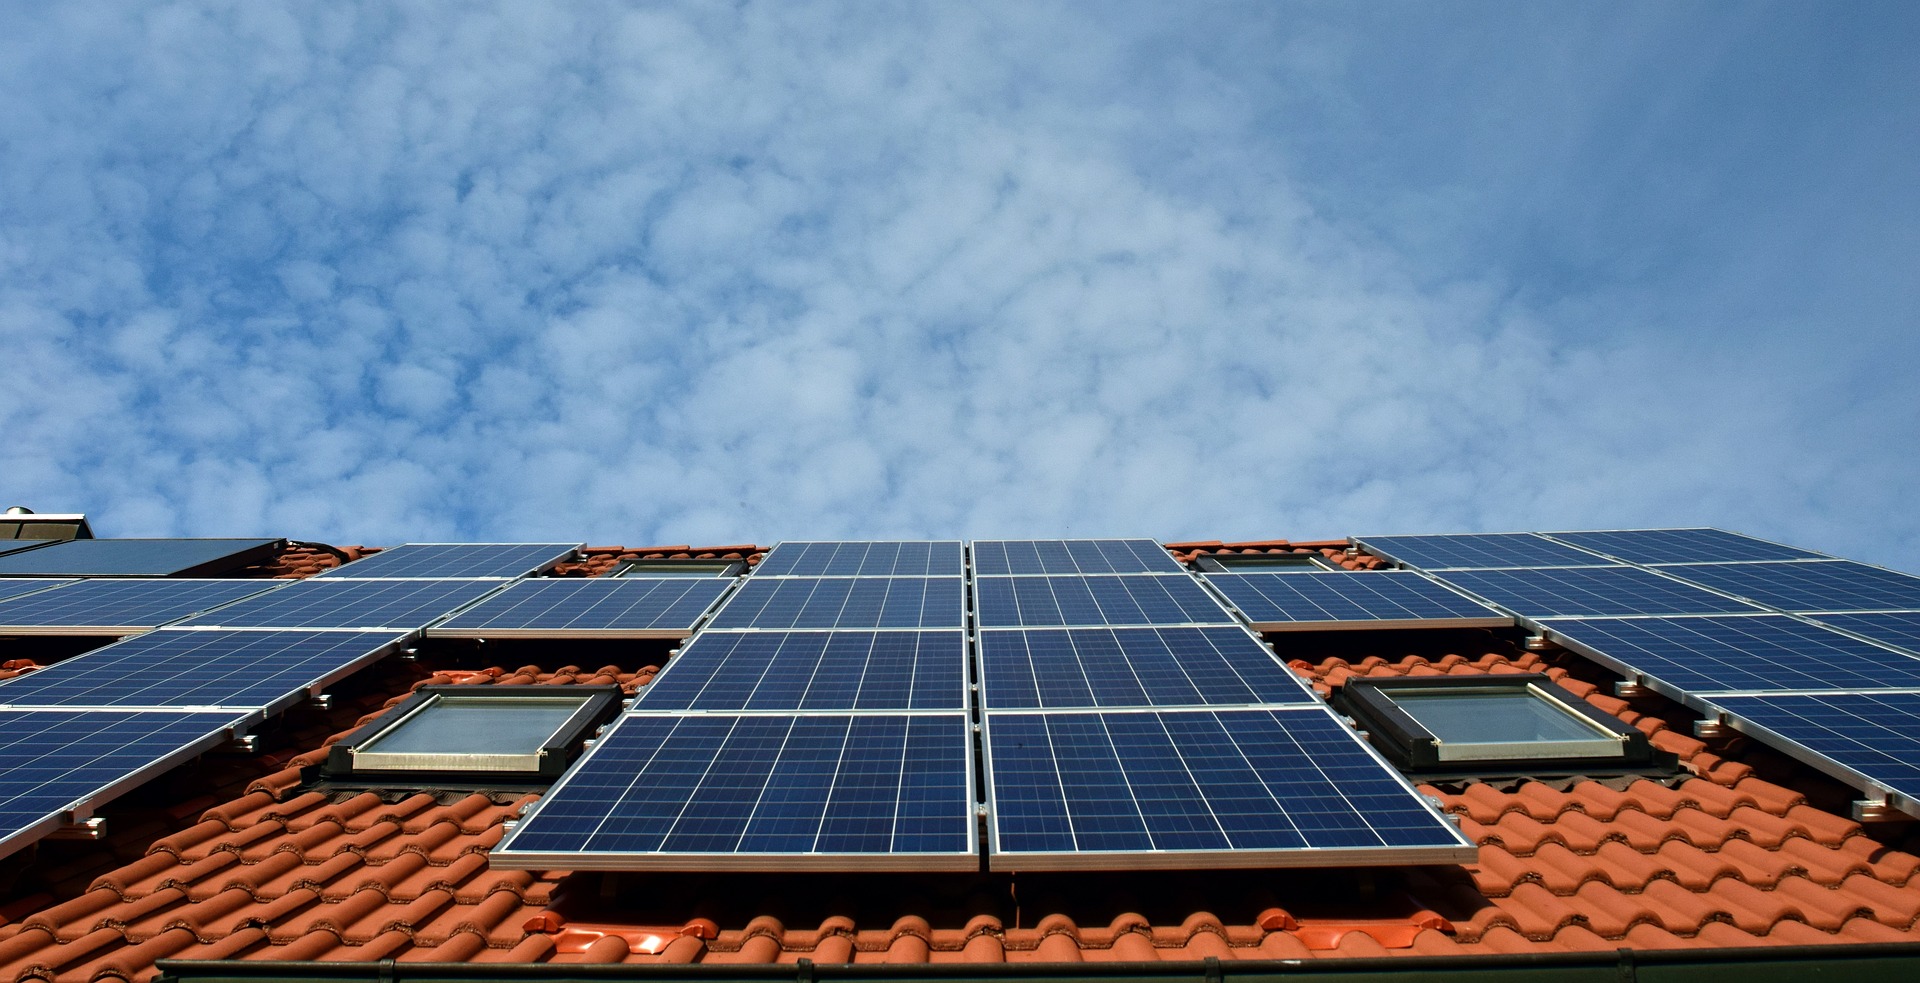 individual solar panels in Sectional Titles Schemes